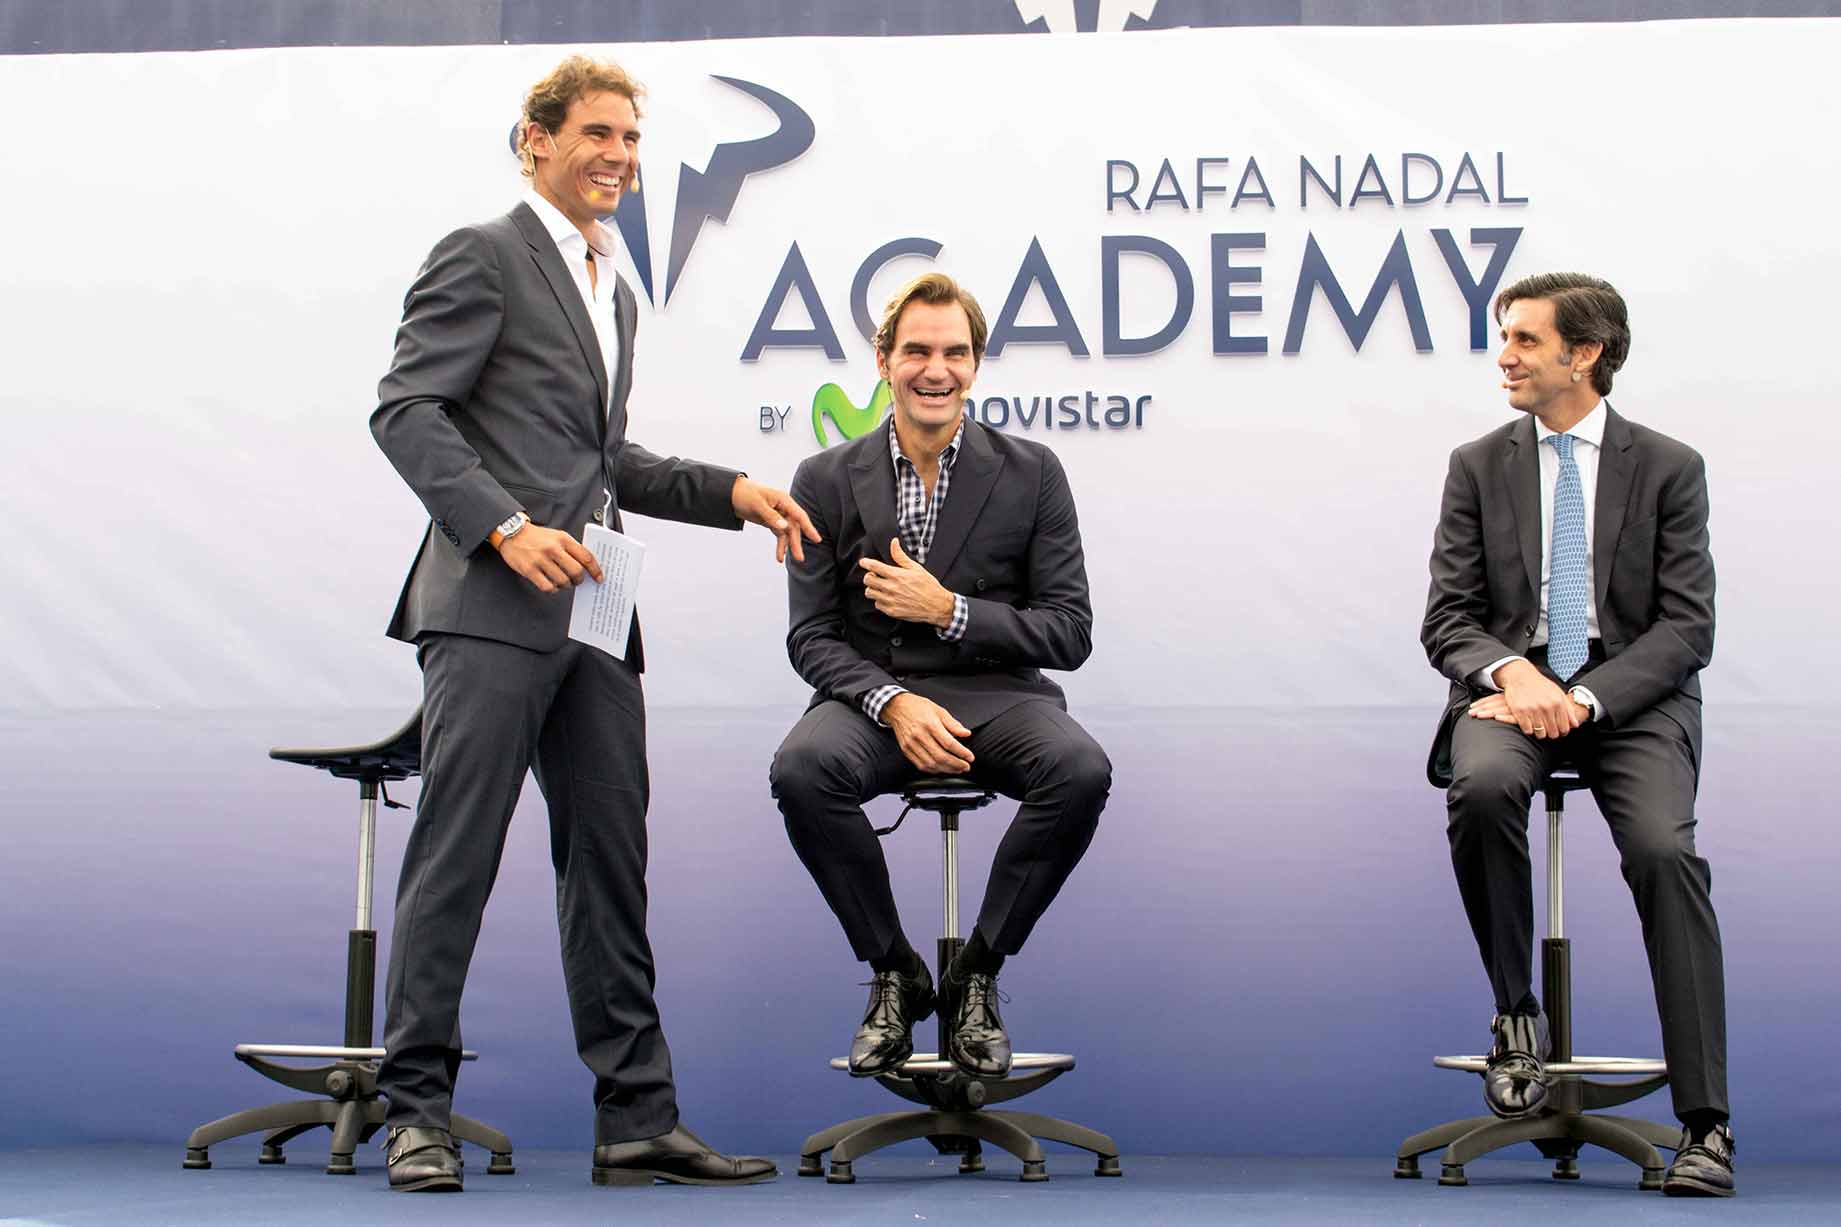 The Rafa Nadal Academy by Movistar, a prizewinner at the National Sports Awards